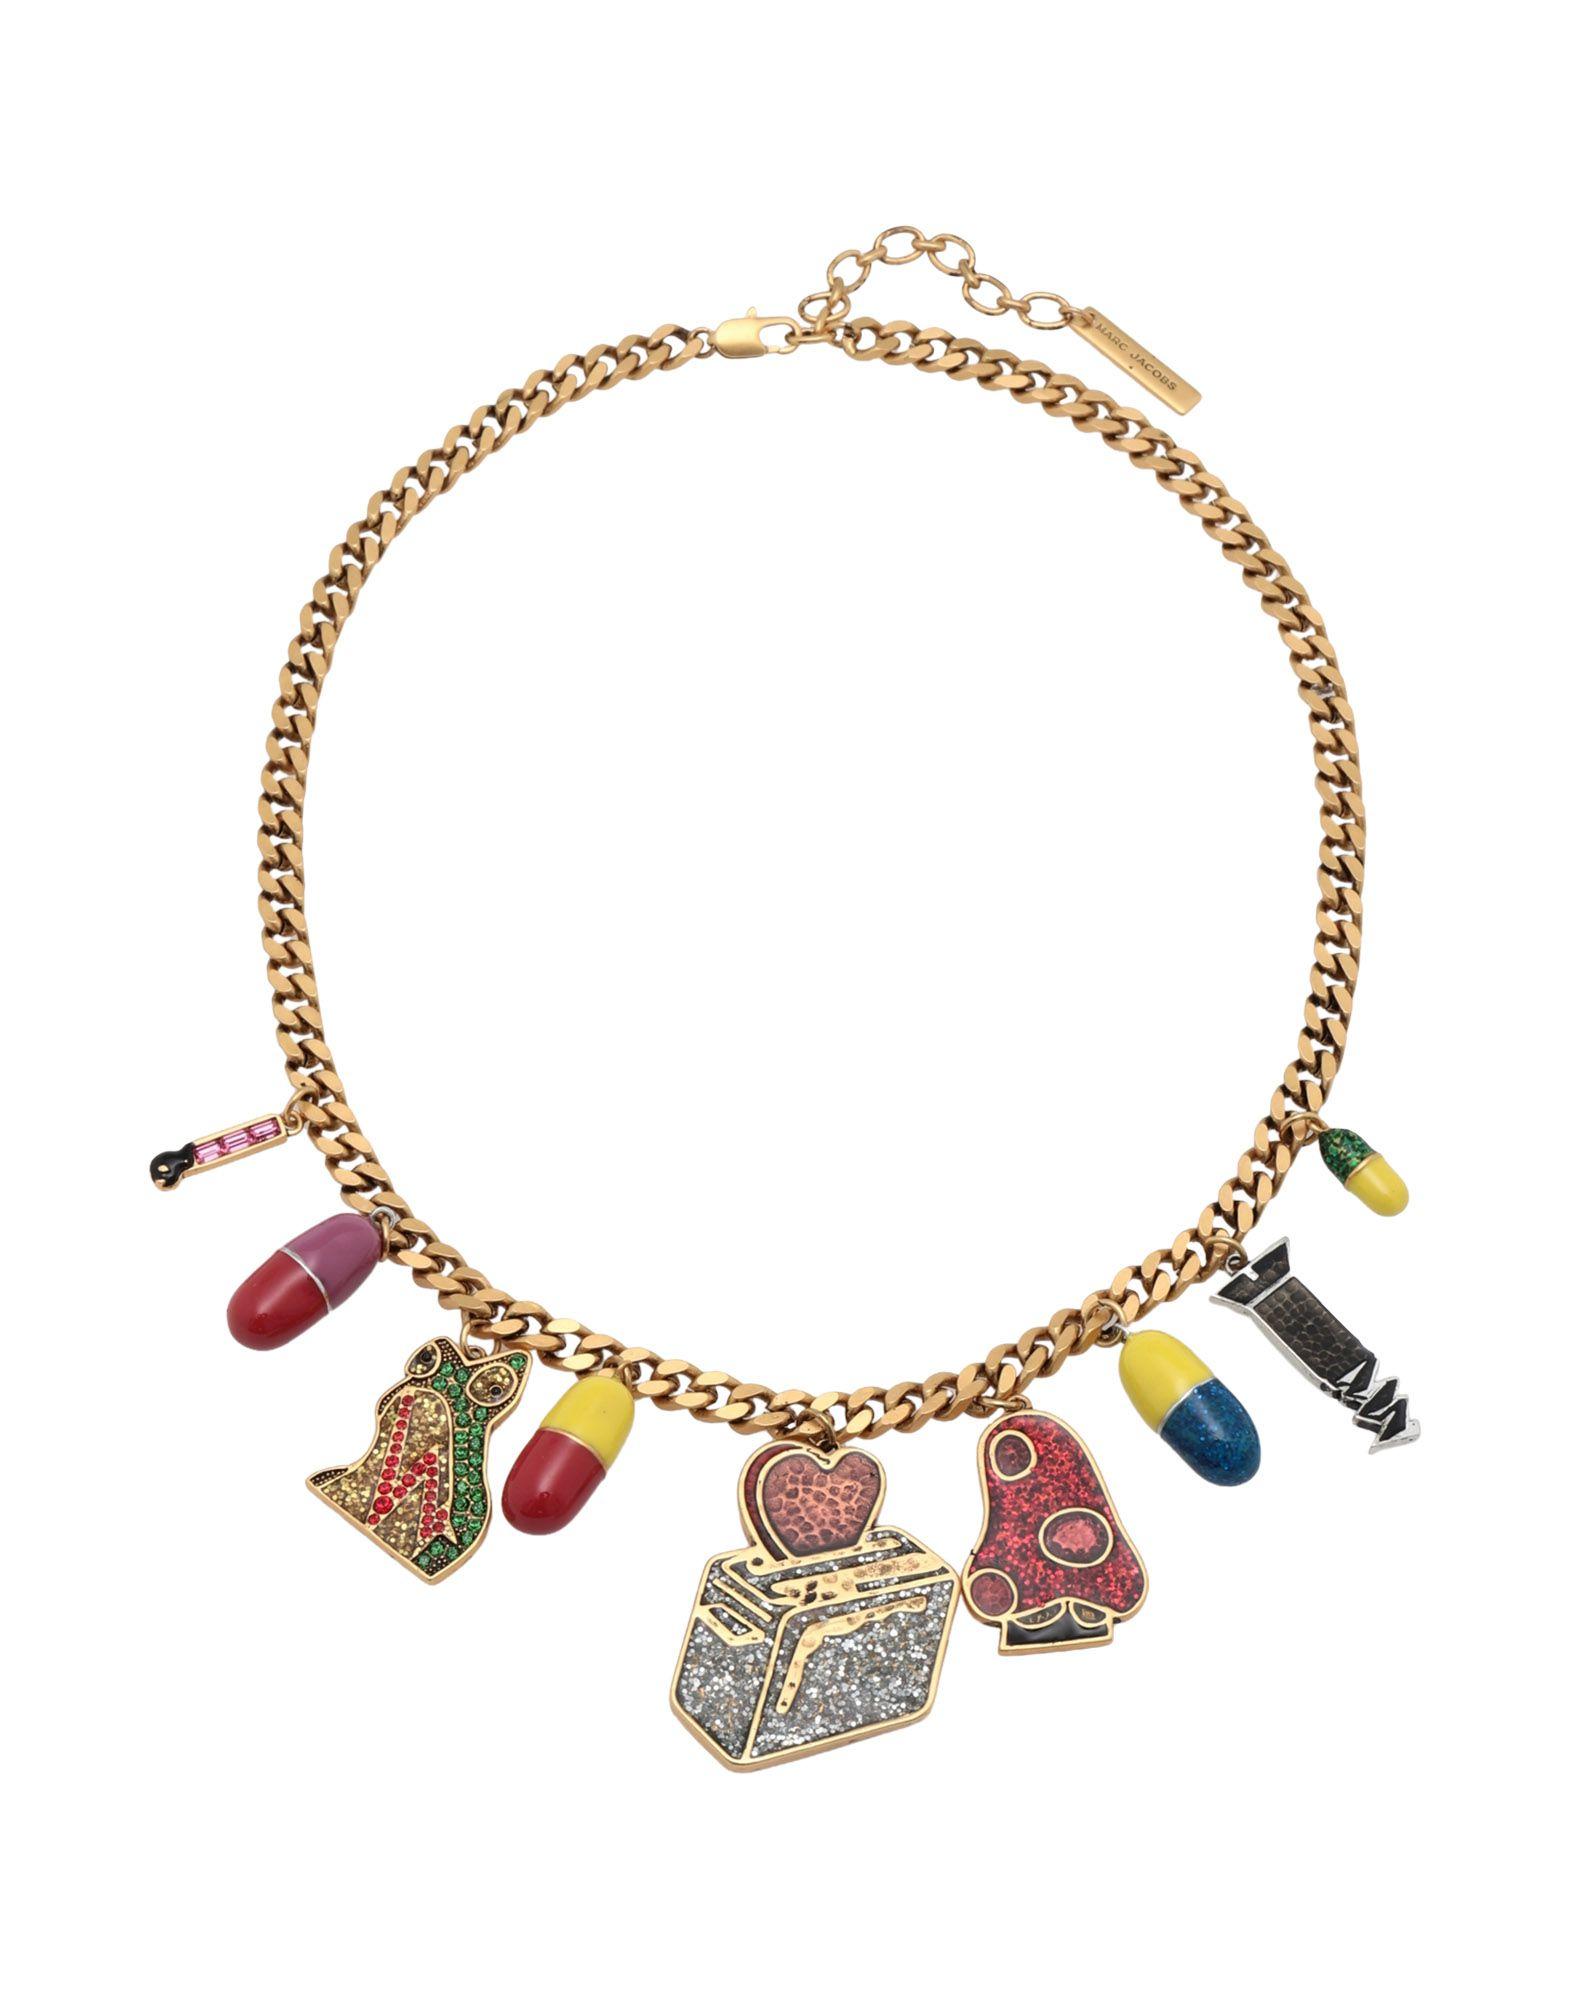 Marc Jacobs Necklace in Metallic - Lyst